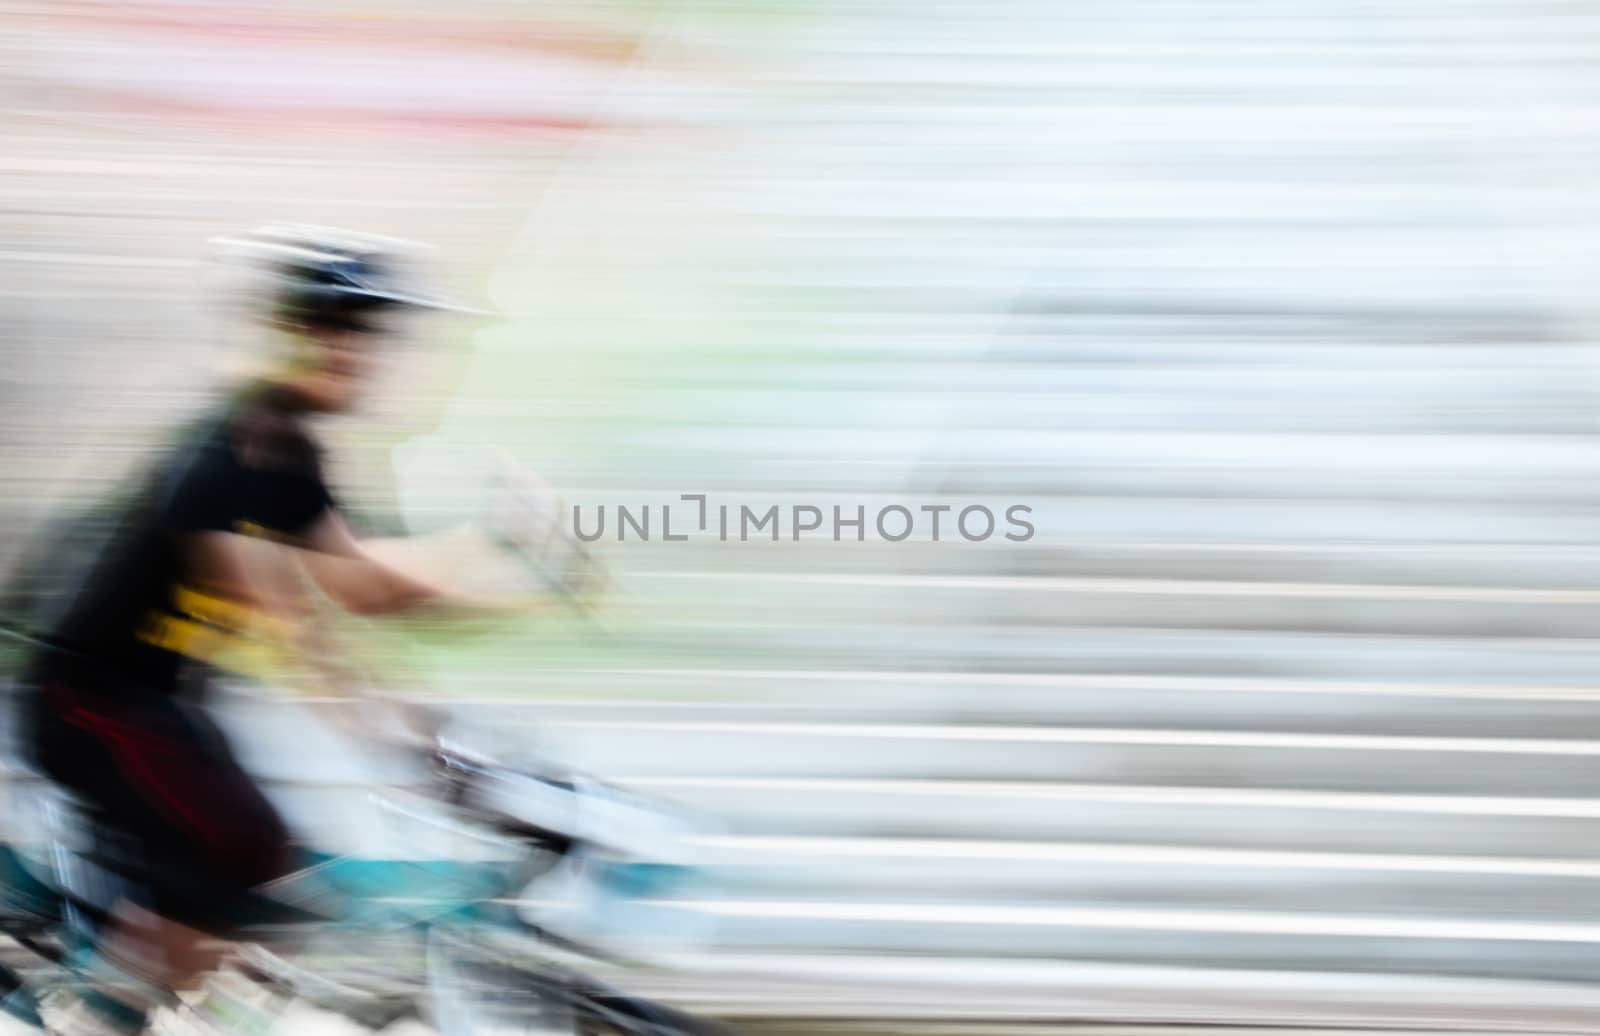 The Speed Bicycle in Motion Blur.